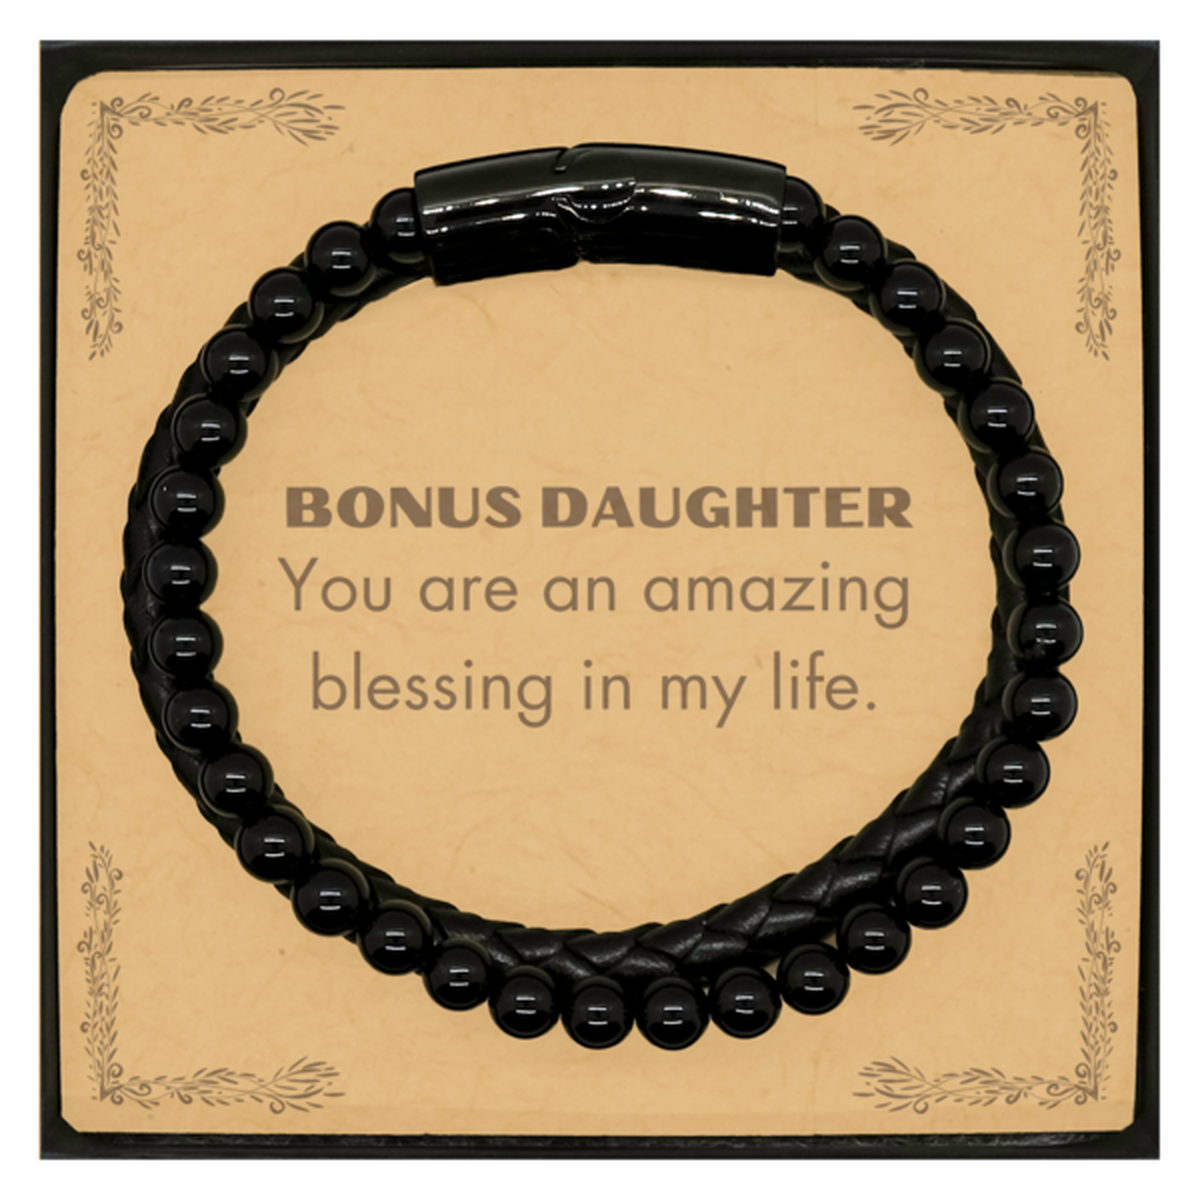 Bonus Daughter Stone Leather Bracelets, You are an amazing blessing in my life, Thank You Gifts For Bonus Daughter, Inspirational Birthday Christmas Unique Gifts For Bonus Daughter